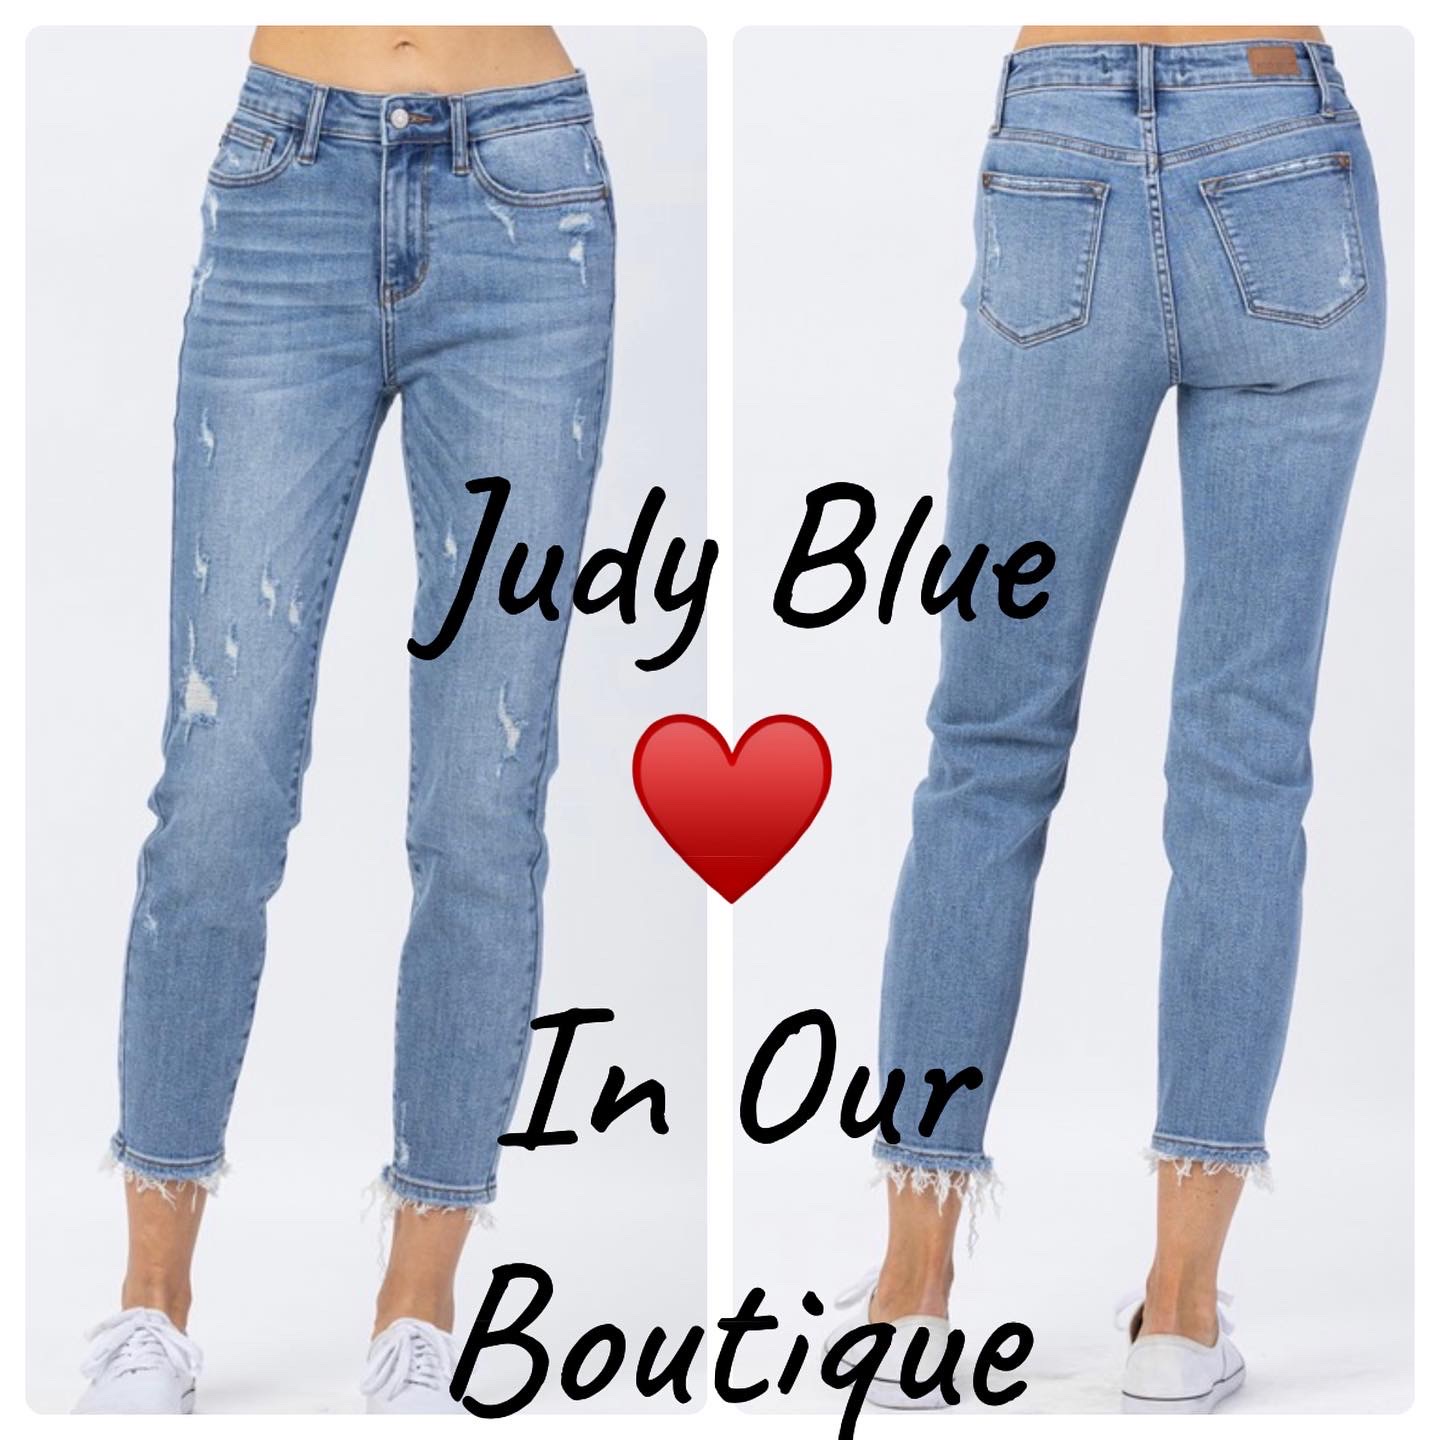 More Judy Blue jeans 